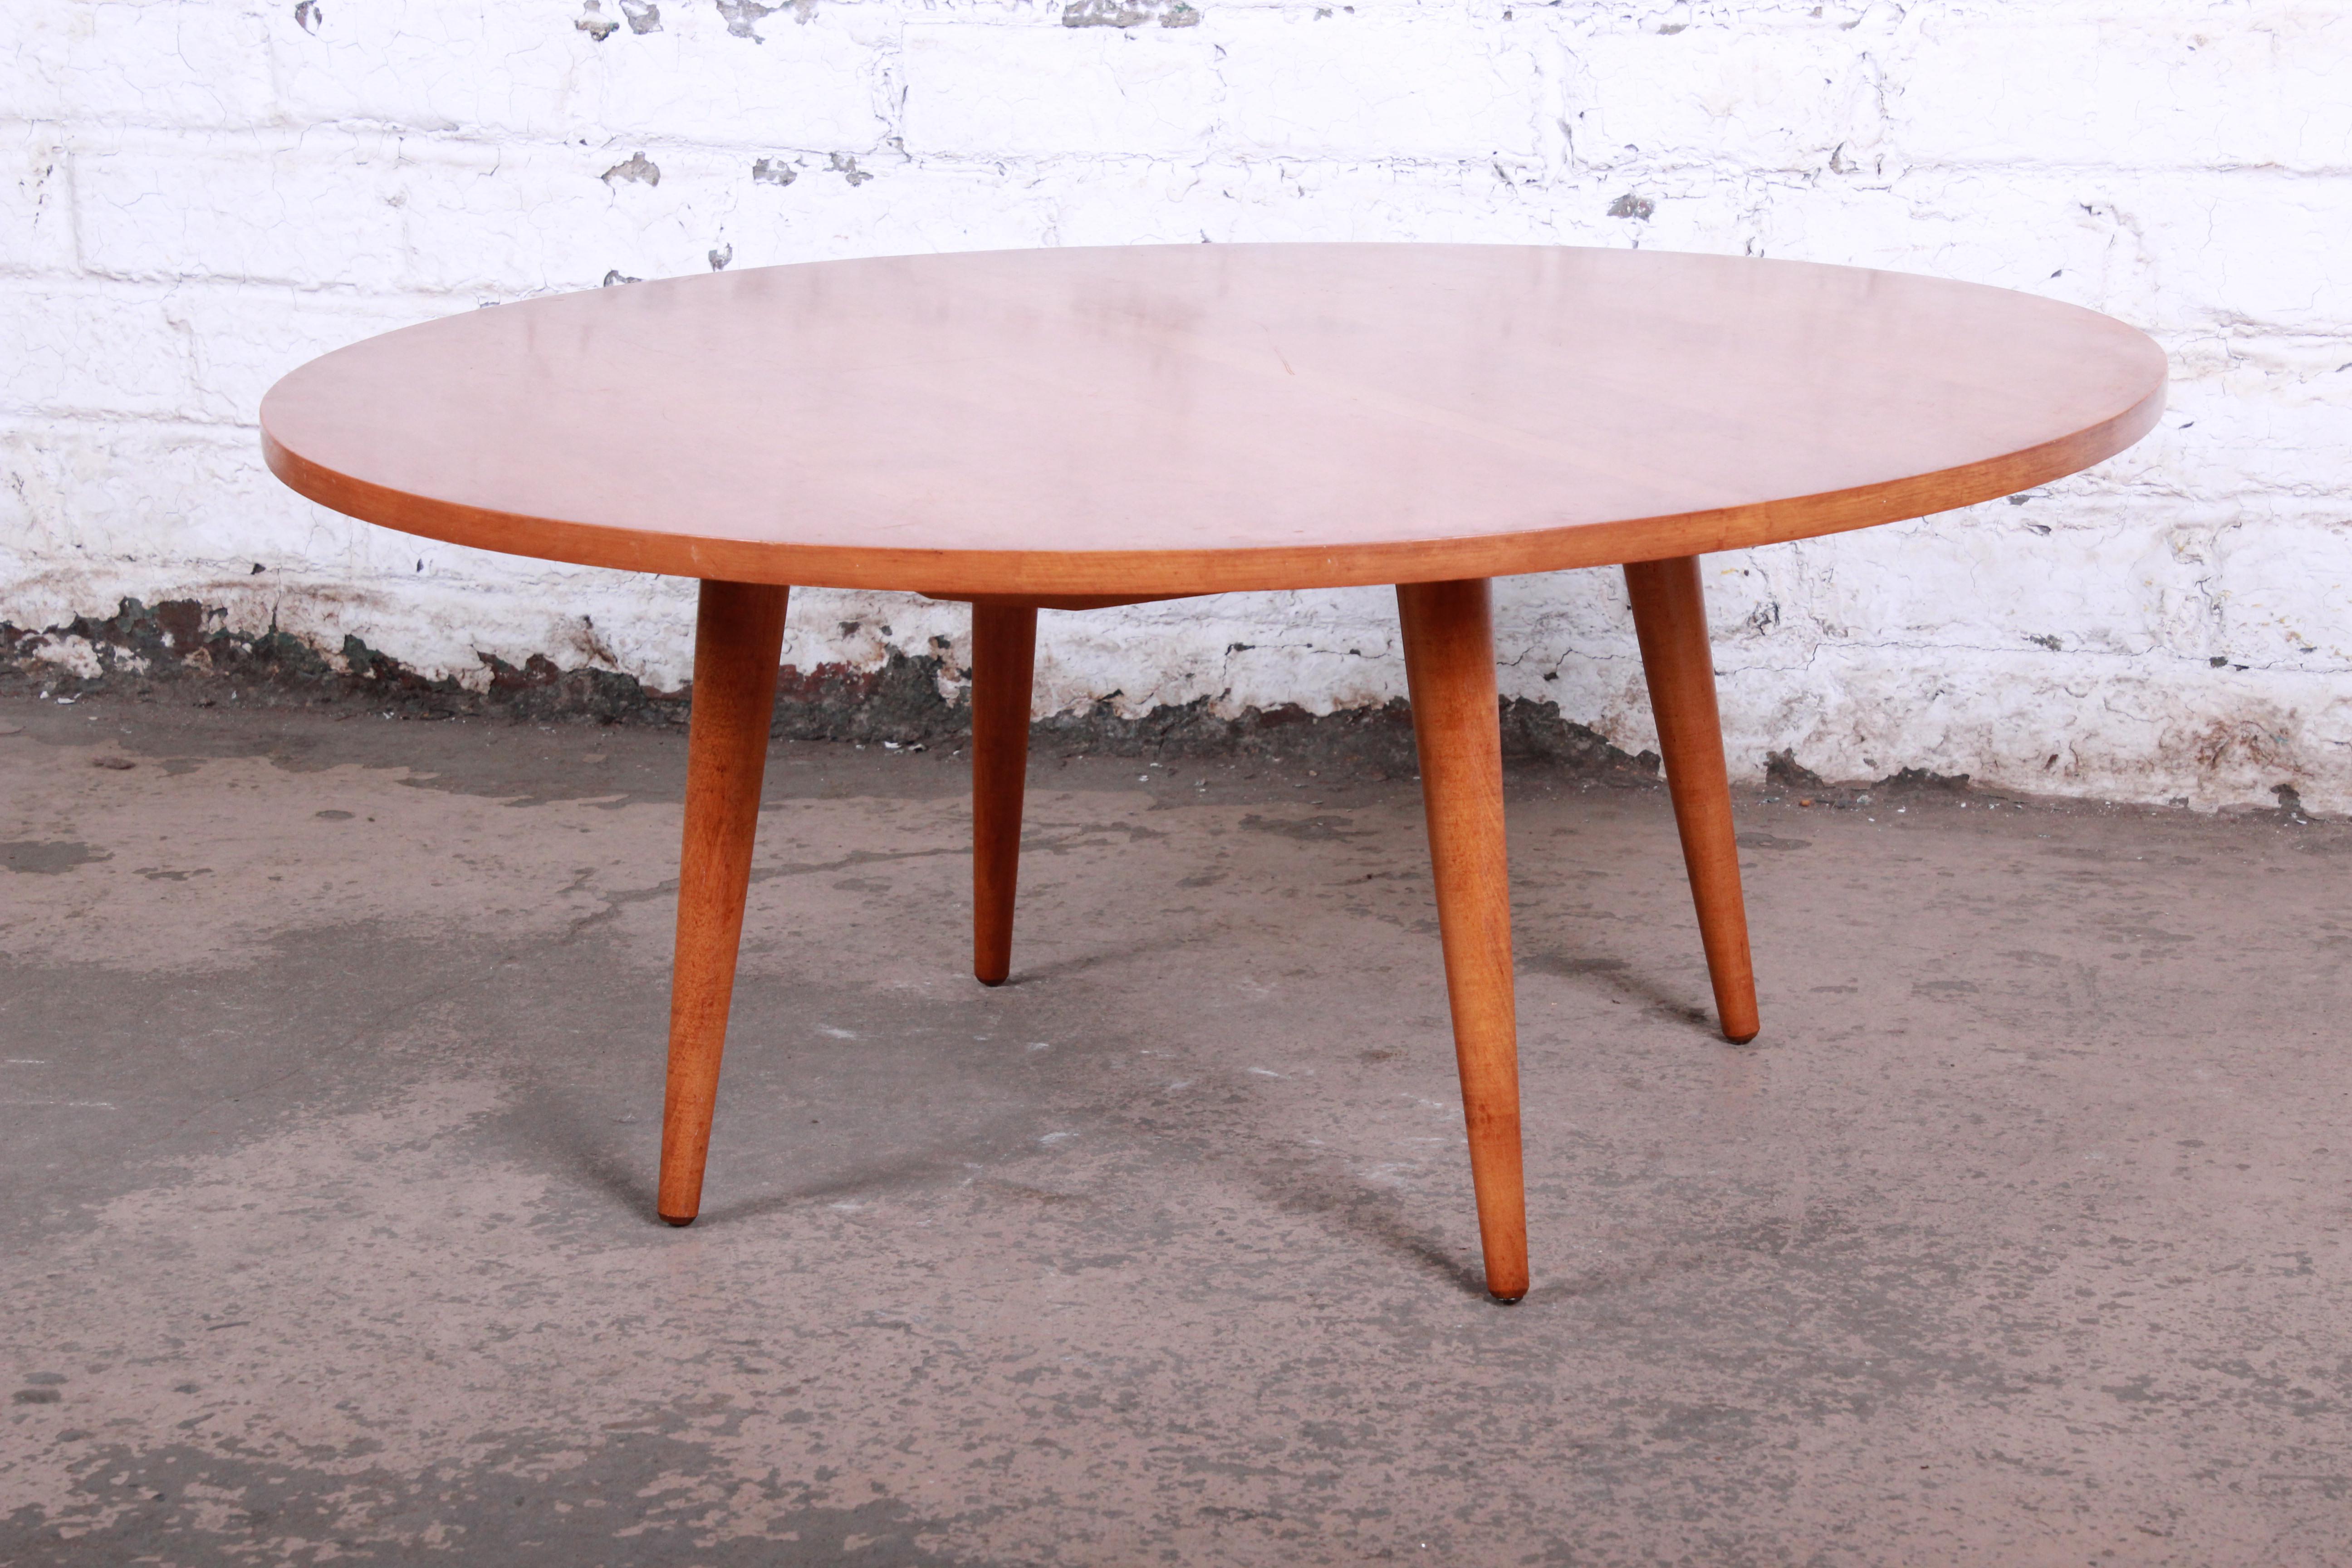 An exceptional Mid-Century Modern round coffee table designed by Paul McCobb for his Planner Group line for Winchendon Furniture. The table features gorgeous wood grain with solid maple construction and McCobb's iconic Minimalist design, including